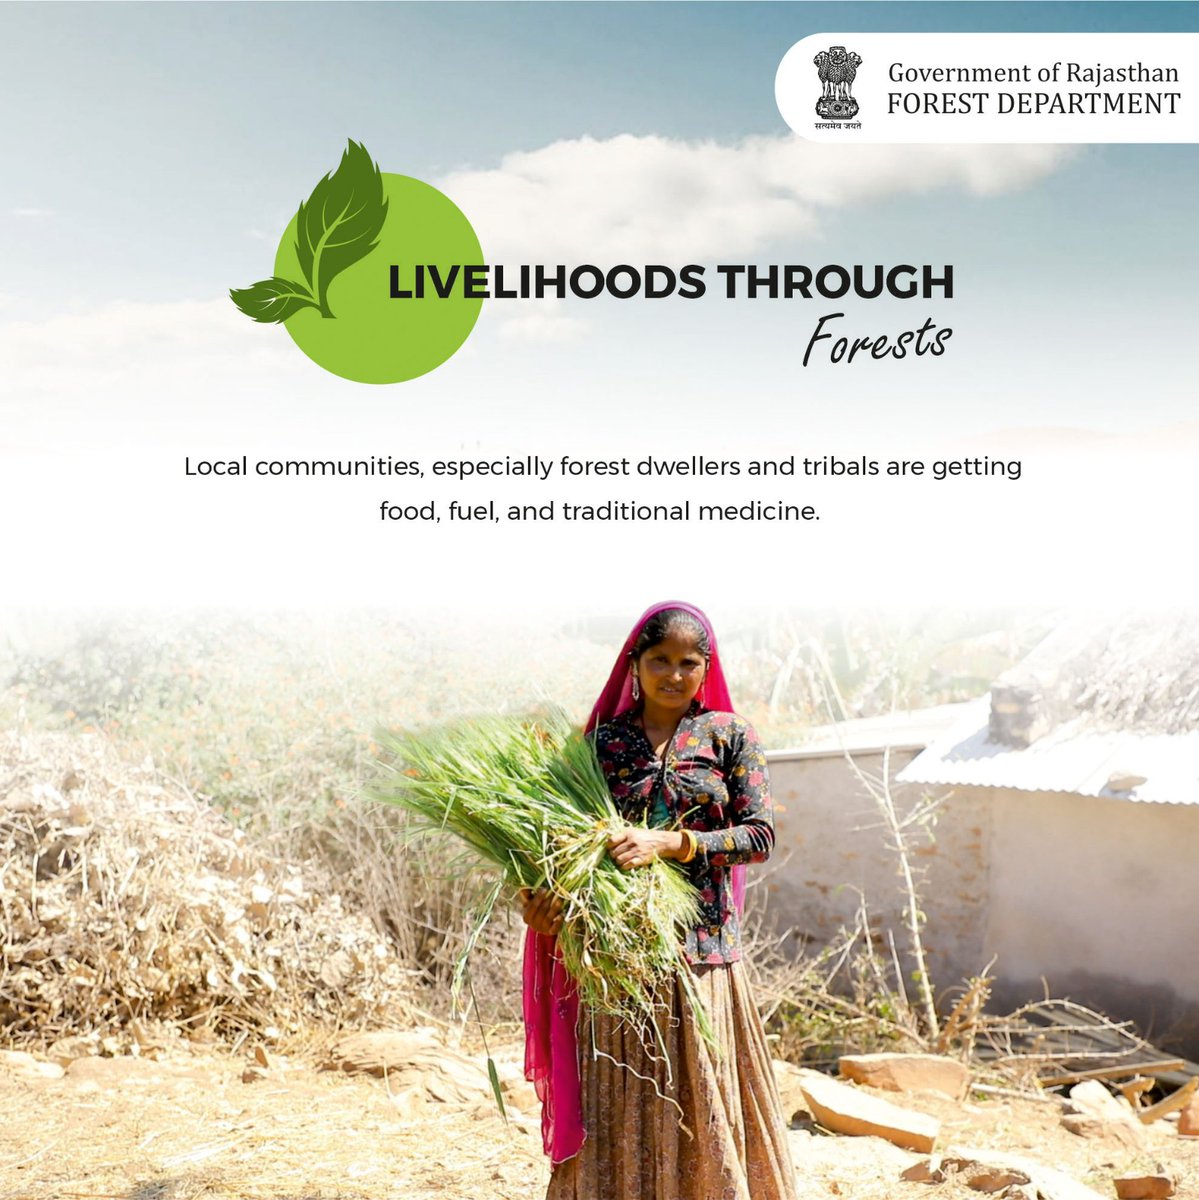 Livelihoods Through Forests
#worldnatureconservationday #MotherEarth  #conservationday #gogreen #sustainable #environment #nature #recycle #reduce #reuse #saveearth #naturelovers #PrakritiKaKhayal
 @incredibleindia  @WCSIndia  @TheWCS  @WCCBHQ  @Team_eBird